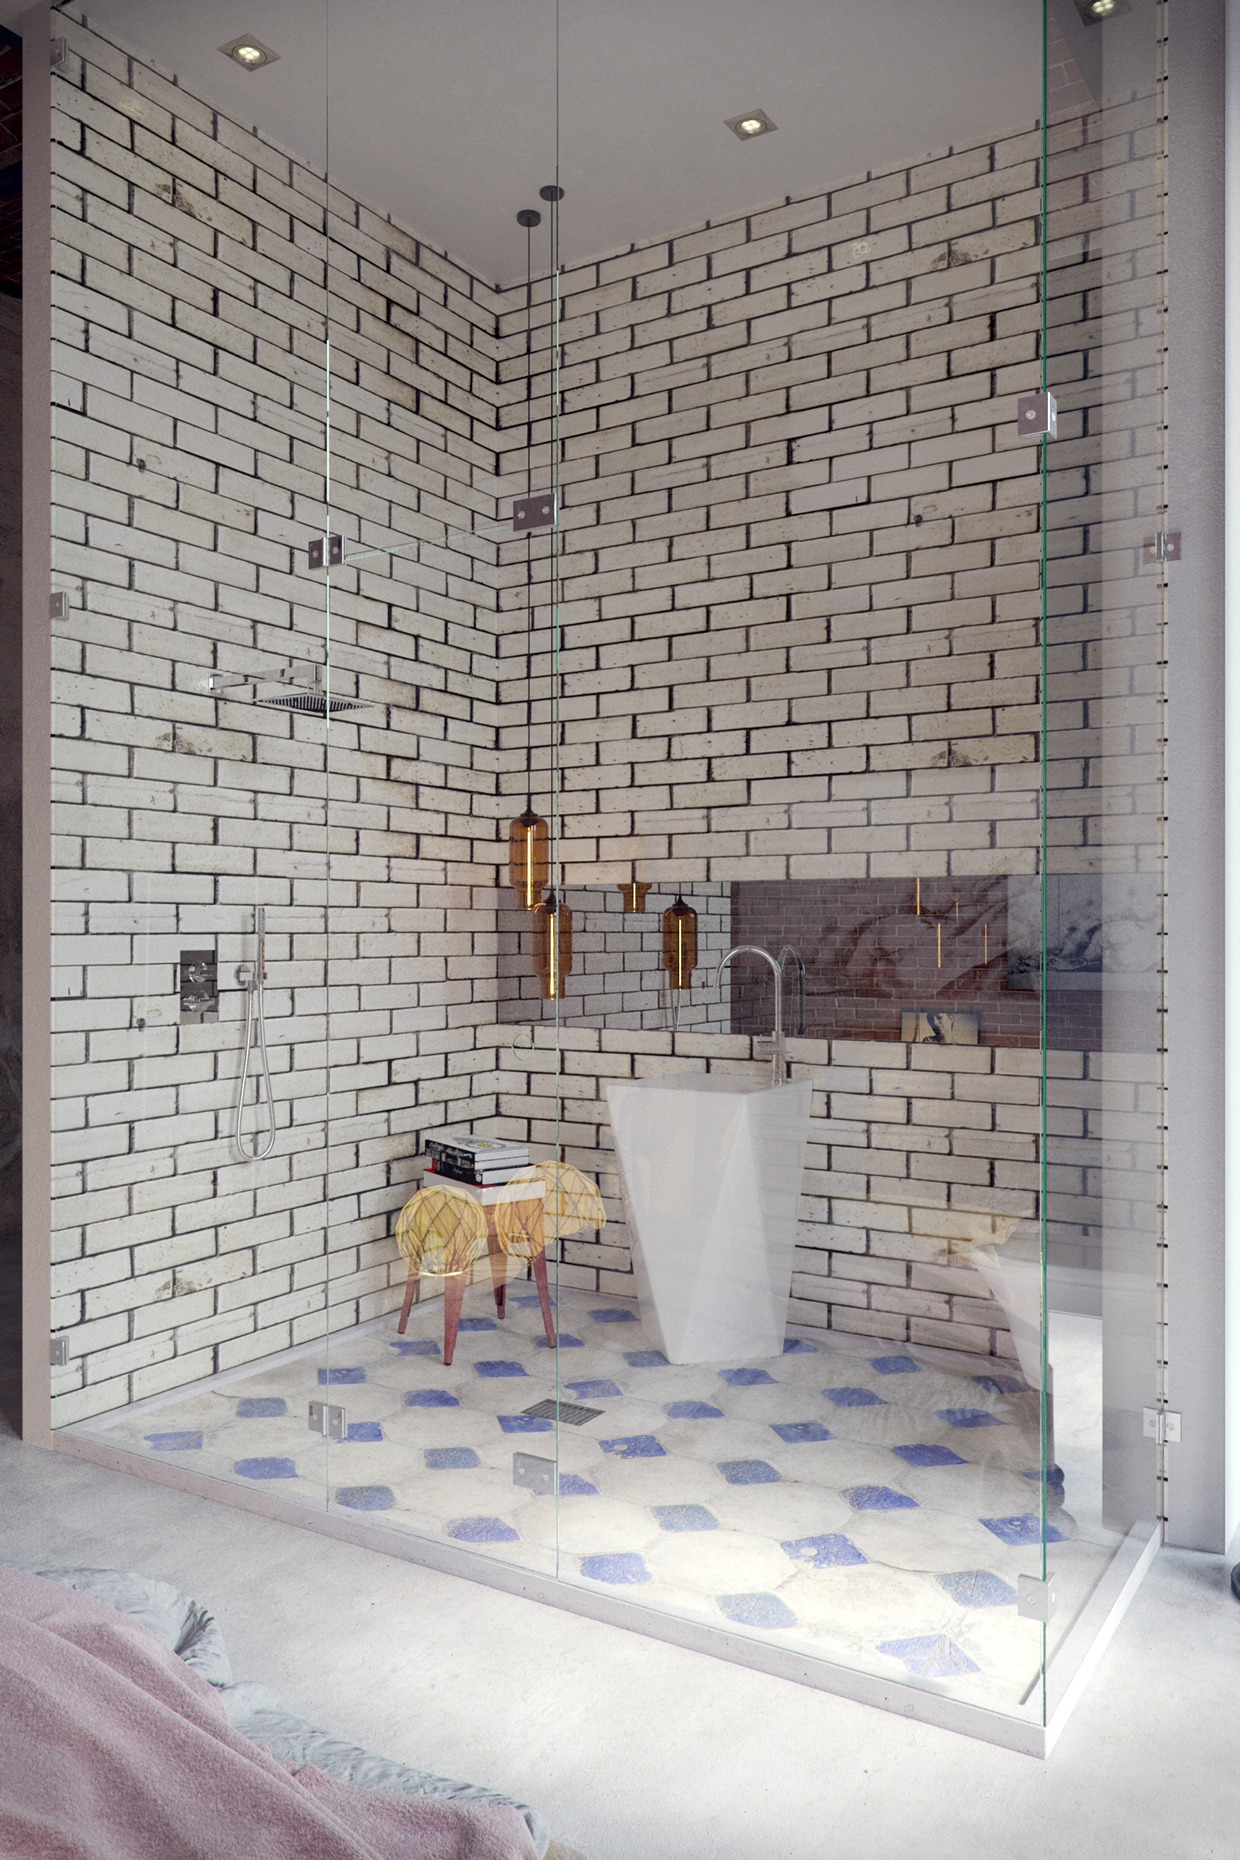 Bathroom design for teenage girls and boys "width =" 1240 "height =" 1860 "srcset =" https://mileray.com/wp-content/uploads/2020/05/1588505427_453_Unique-and-Artistic-Bedroom-Design-With-Simple-Furniture-For-Young.jpg 1240w, https: //mileray.com/wp-content/uploads/2016/03/white-brick-design2-200x300.jpg 200w, https://mileray.com/wp-content/uploads/2016/03/white-brick-design2 -768x1152.jpg 768w, https://mileray.com/wp-content/uploads/2016/03/white-brick-design2-683x1024.jpg 683w, https://mileray.com/wp-content/uploads/2016 /03/white-brick-design2-696x1044.jpg 696w, https://mileray.com/wp-content/uploads/2016/03/white-brick-design2-1068x1602.jpg 1068w, https://mileray.com /wp-content/uploads/2016/03/white-brick-design2-280x420.jpg 280w "sizes =" (maximum width: 1240px) 100vw, 1240px